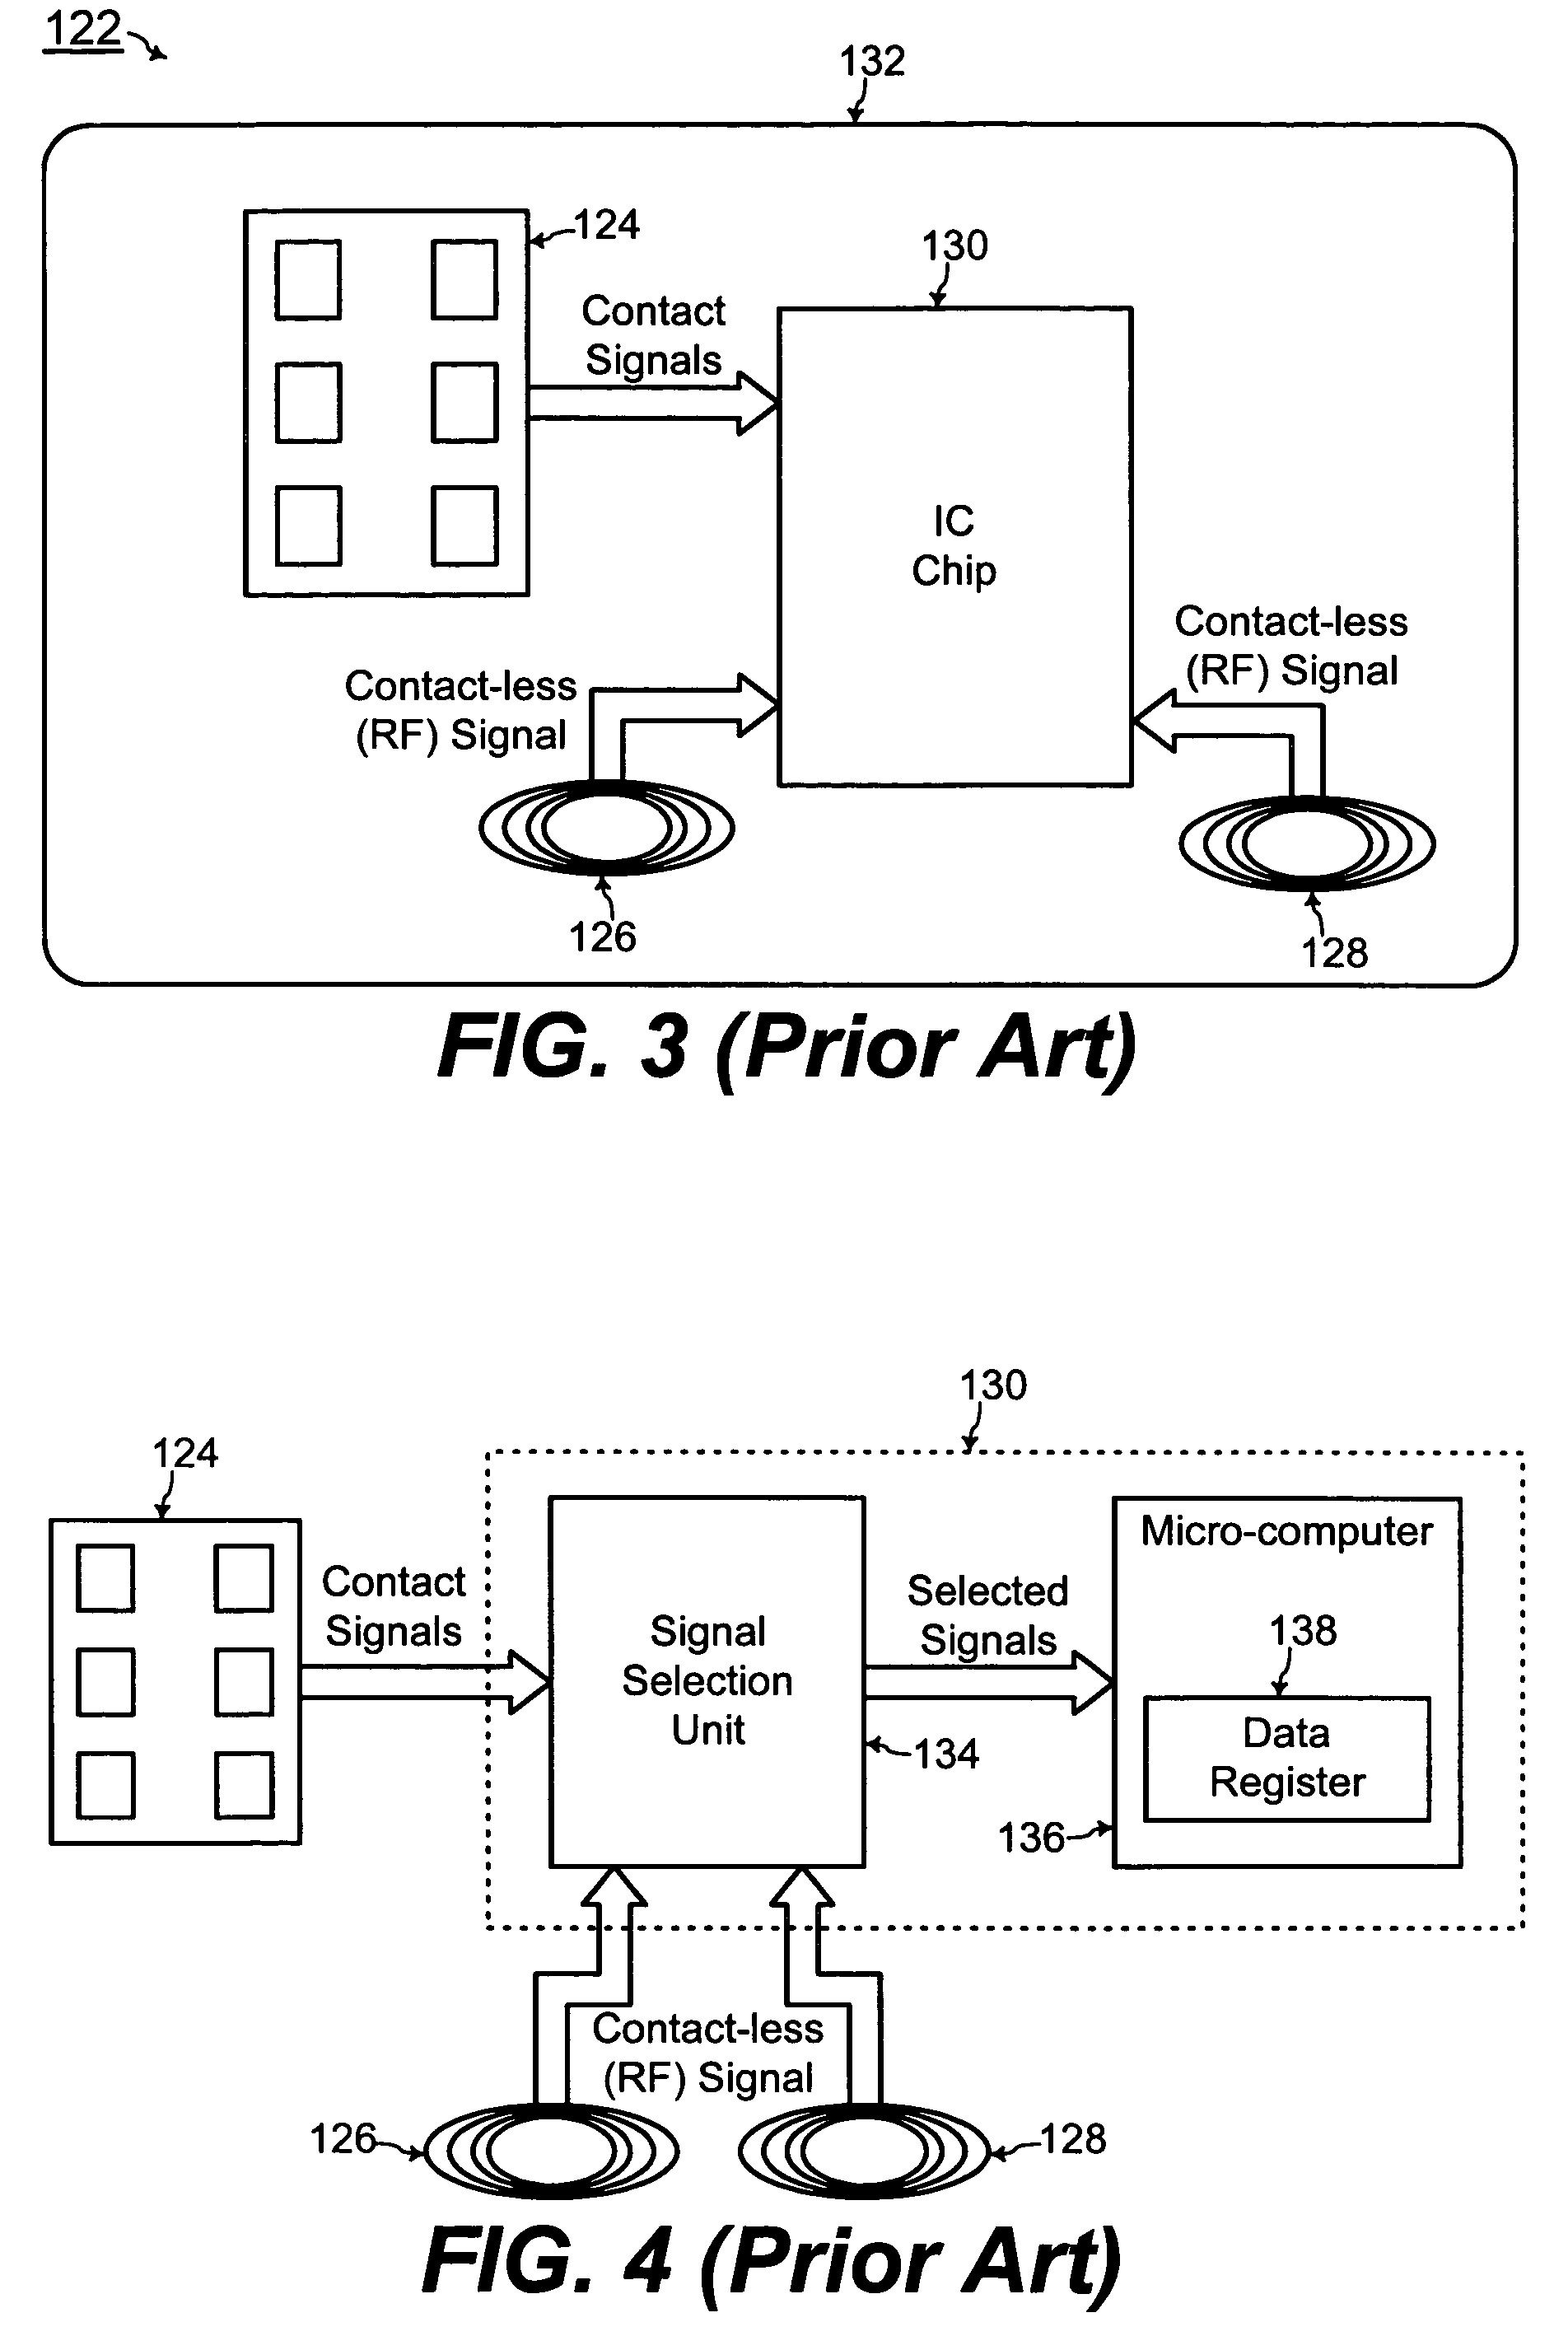 Chip card with simultaneous contact and contact-less operations